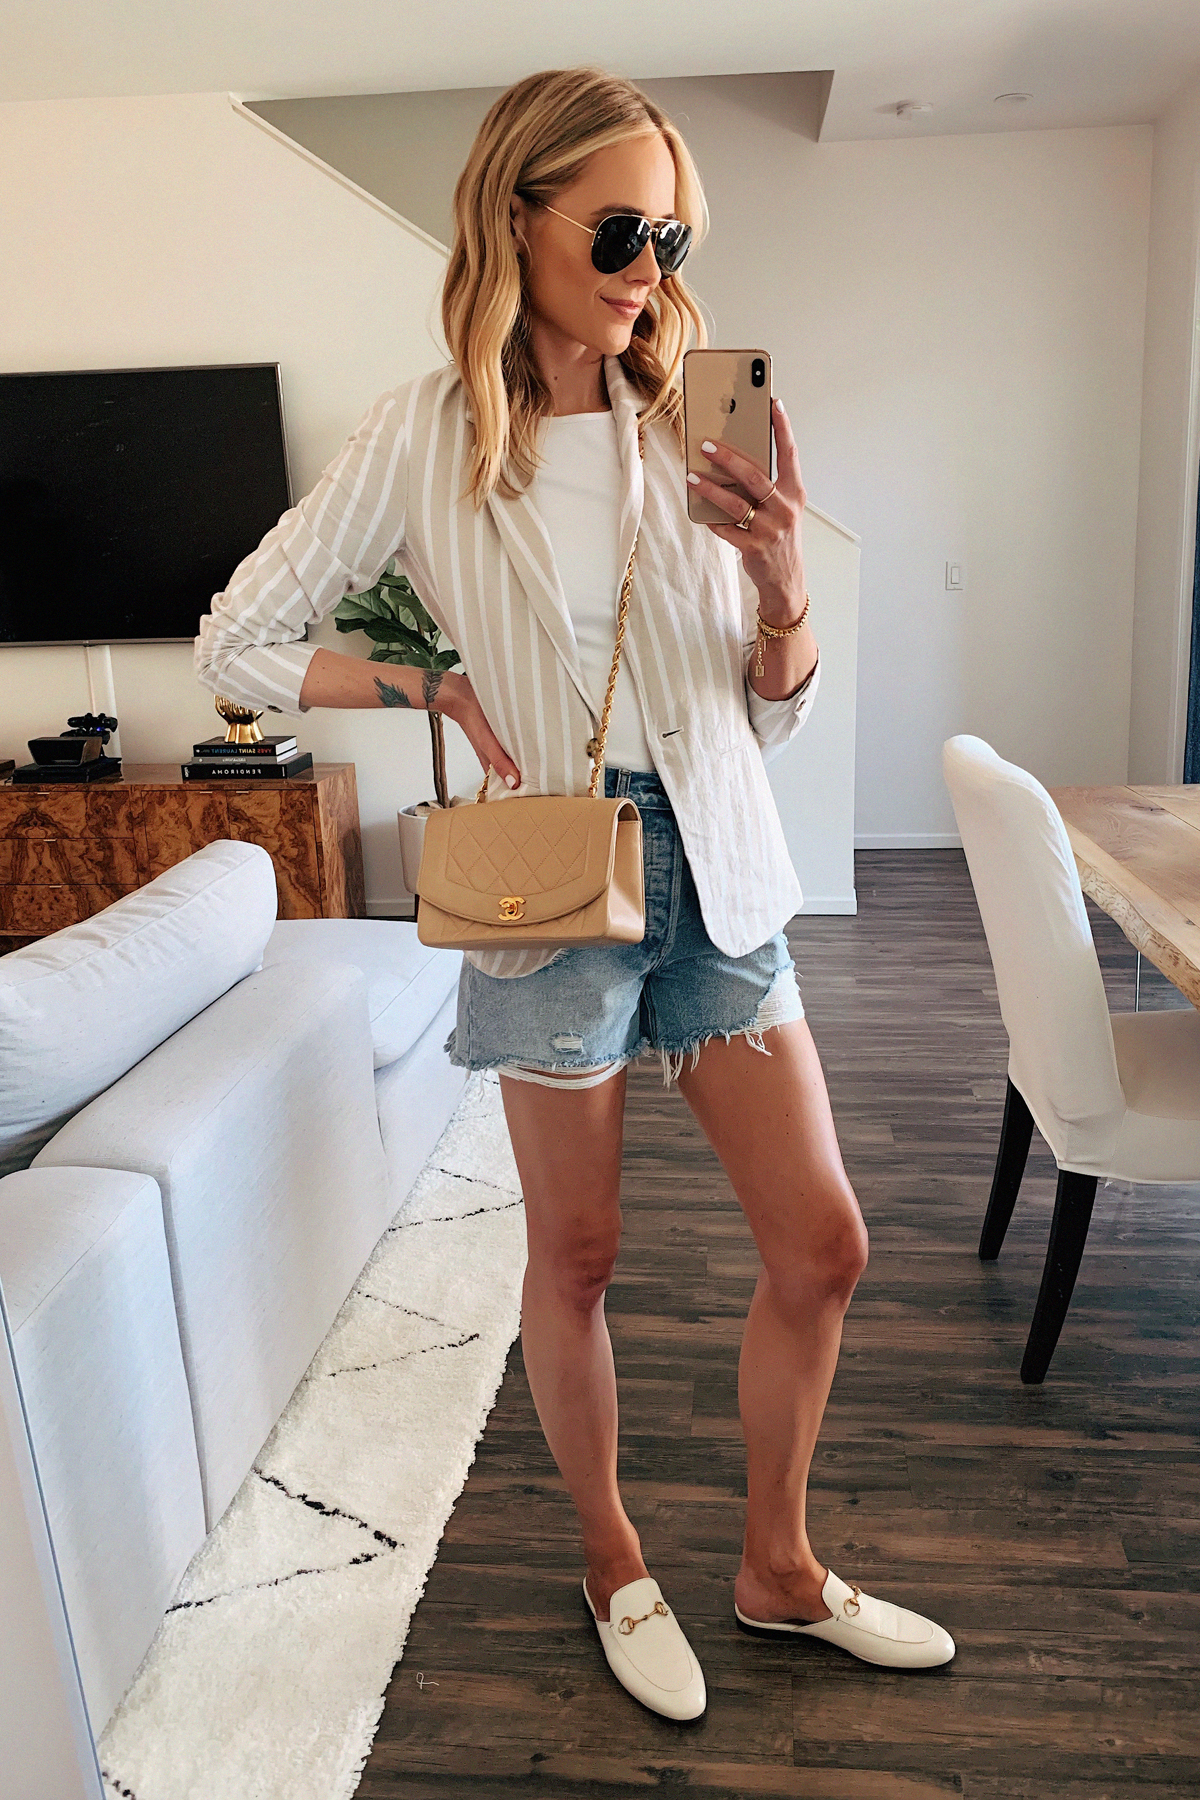 Abercrombie & Fitch Haul: 18 Outfits to Wear this Summer - Fashion Jackson